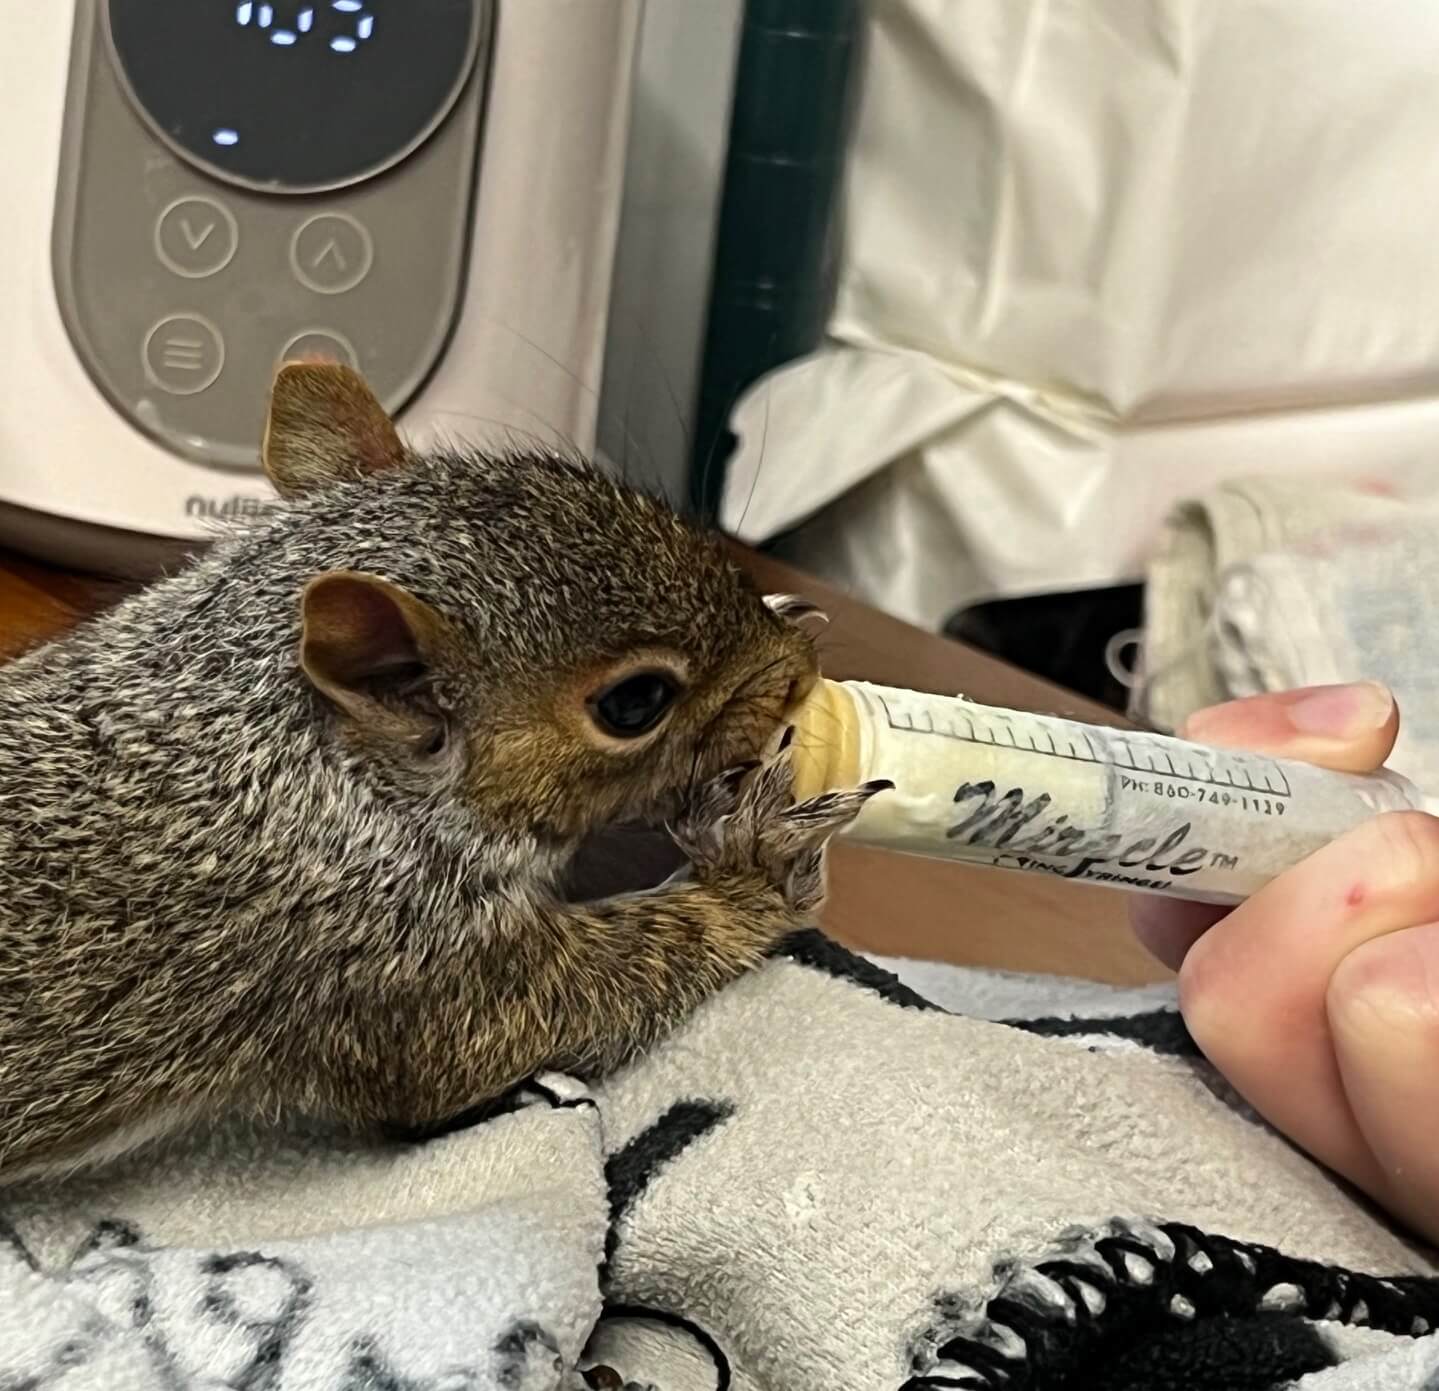 Baby squirrels are being rehabilitated at Evelyn Alexander Wildlife Rescue